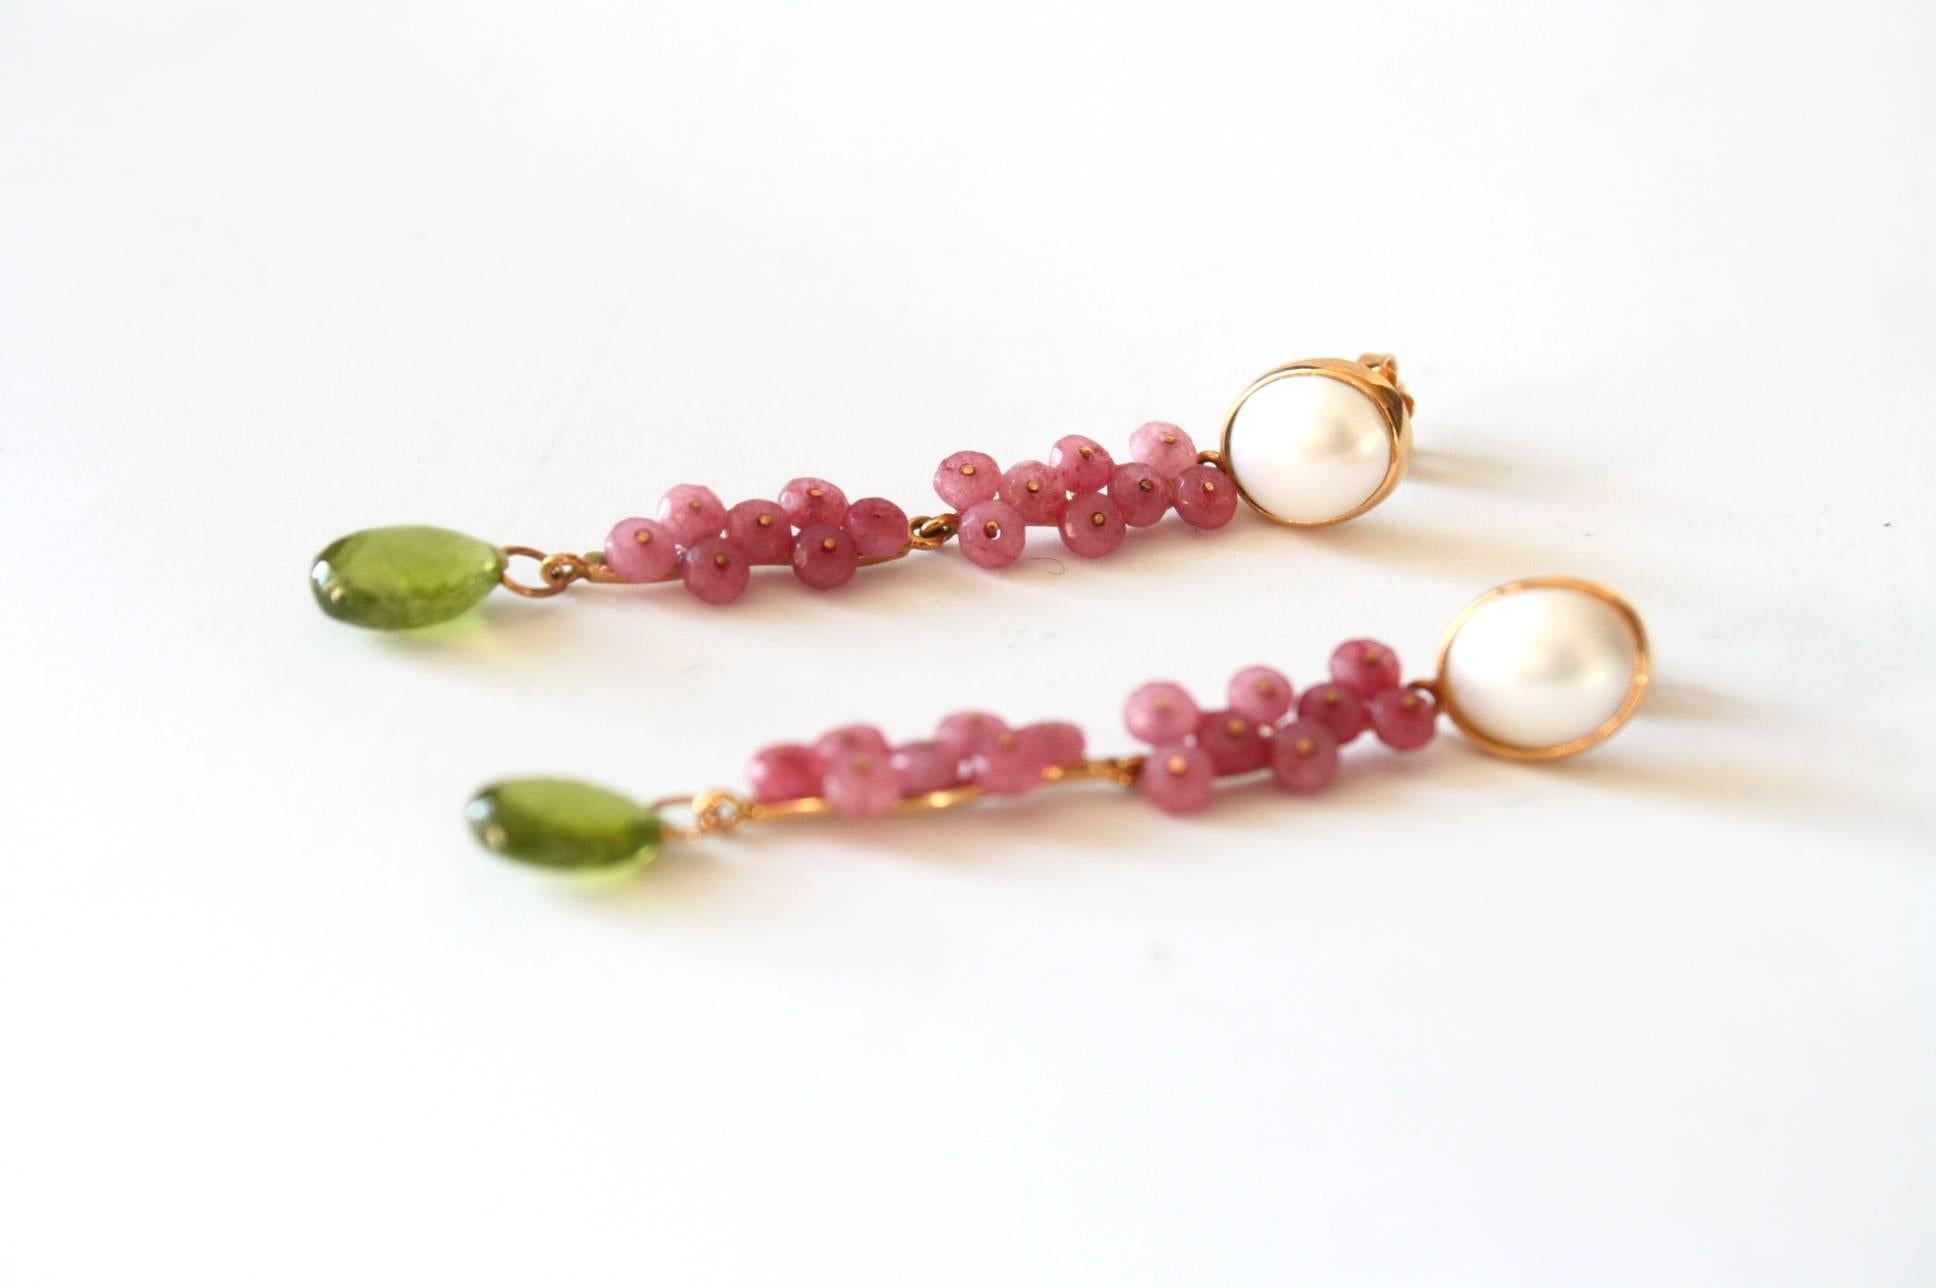  Long earrings with faced peridot drop rubellite stone and pearl cabochon, weight 6,0 long 7cm.
All Giulia Colussi jewelry is new and has never been previously owned or worn. Each item will arrive at your door beautifully gift wrapped in our boxes,